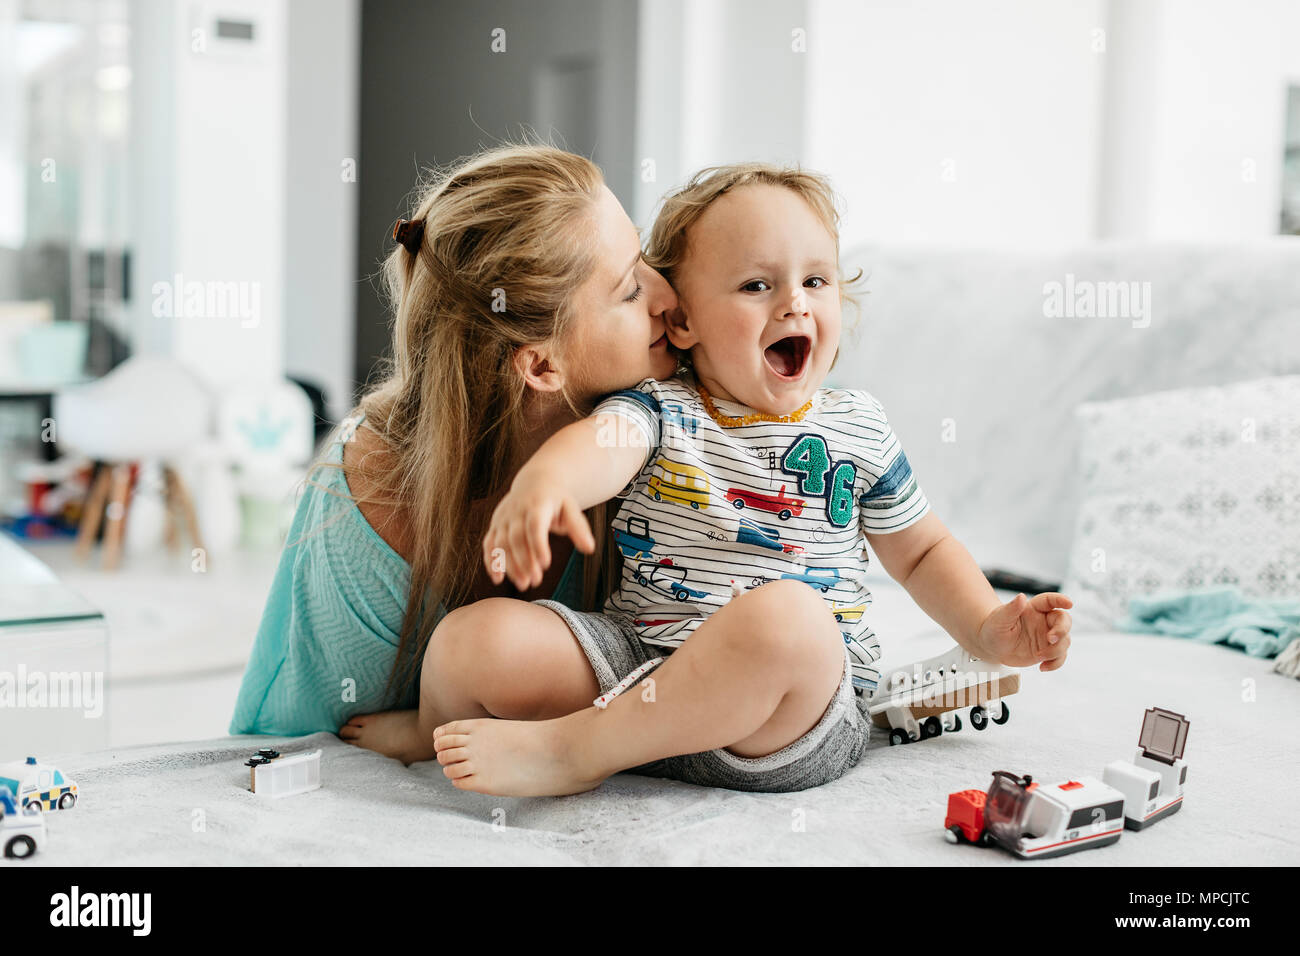 A mother and her child enjoying being together. A mom and her young son having fun together and laughing. Stock Photo